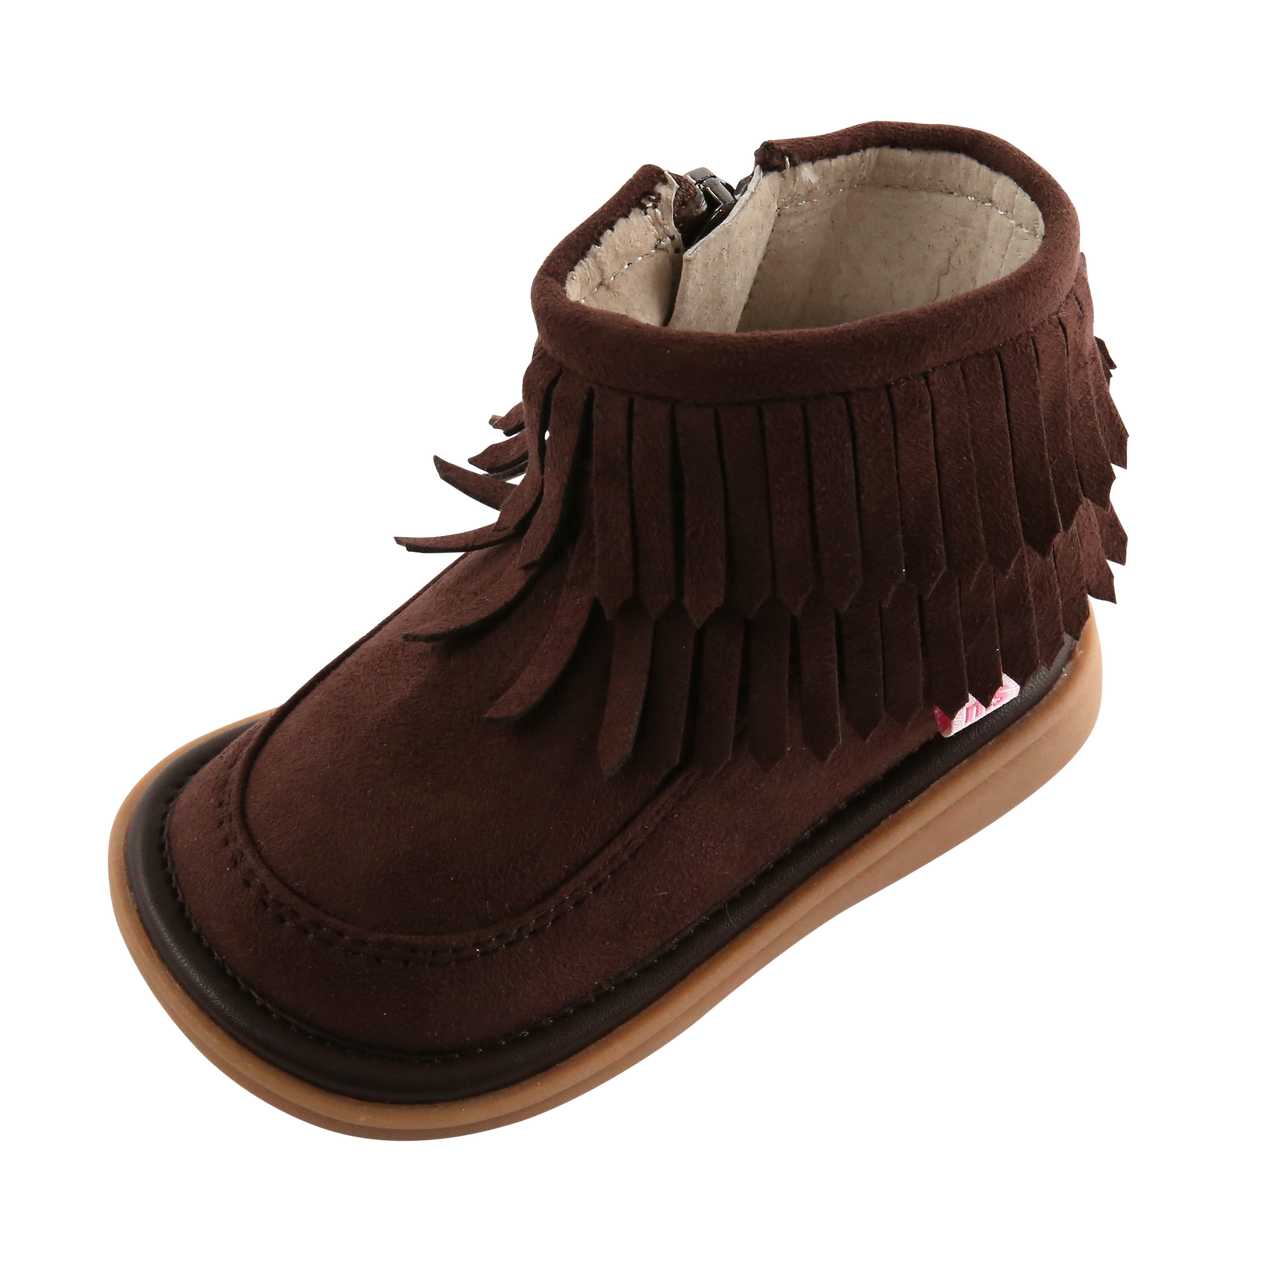 Piper Fringe Boot | Toddler Squeaky Shoes | mooshu TRAINERS | Feel the warmth with this cozy moccasin fringe boot. Why mooshu TRAINERS? Your baby is walking. You want well-designed toddler squeaky shoes that are gentle on growing feet and encourage a proper heel to toe gait.